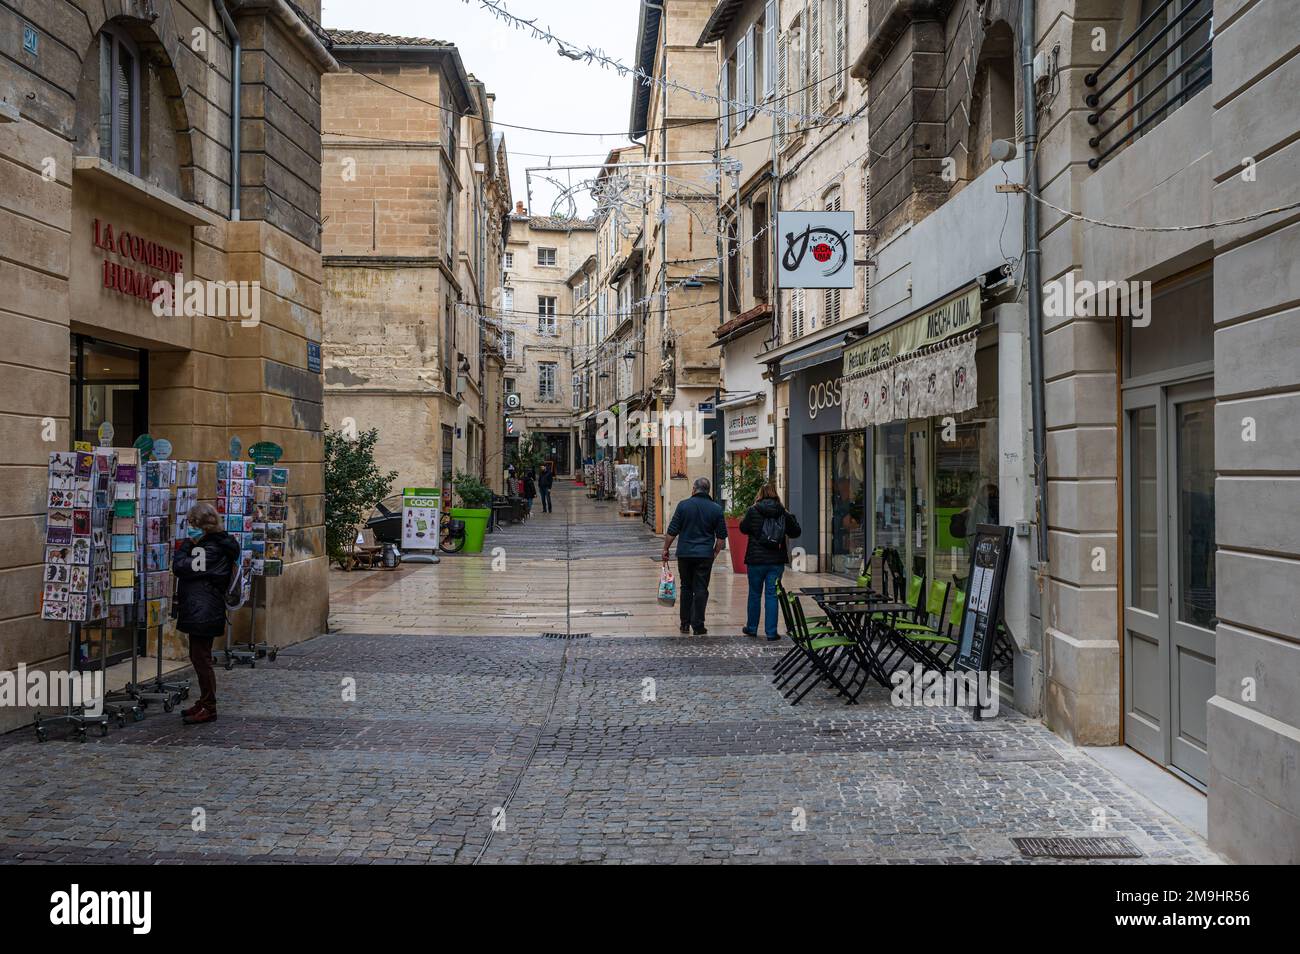 Avignon, Vaucluse, France, 12 29 2022 - Touristical shopping street with cobble stones in old town Stock Photo